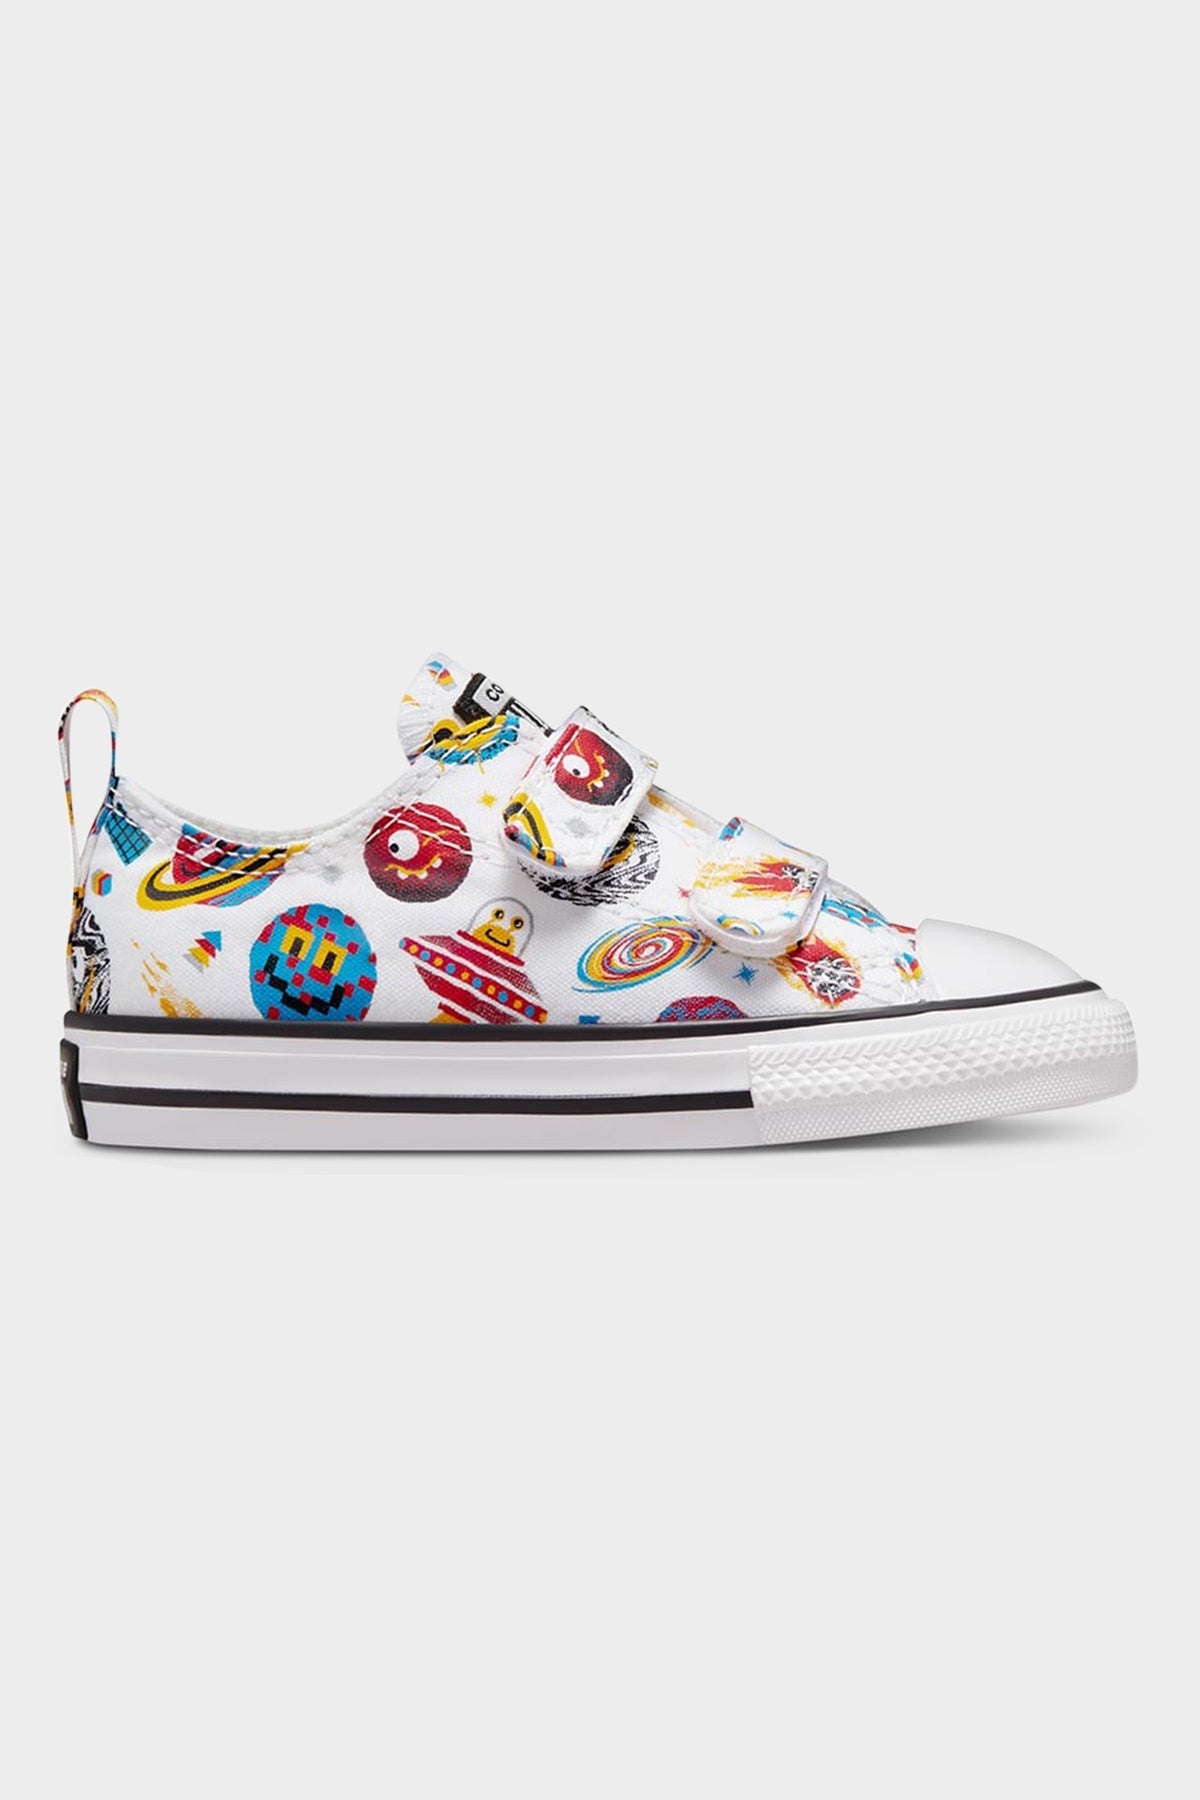 Converse Infant CT Space Cruiser 2V Low White/Red/Amarillo